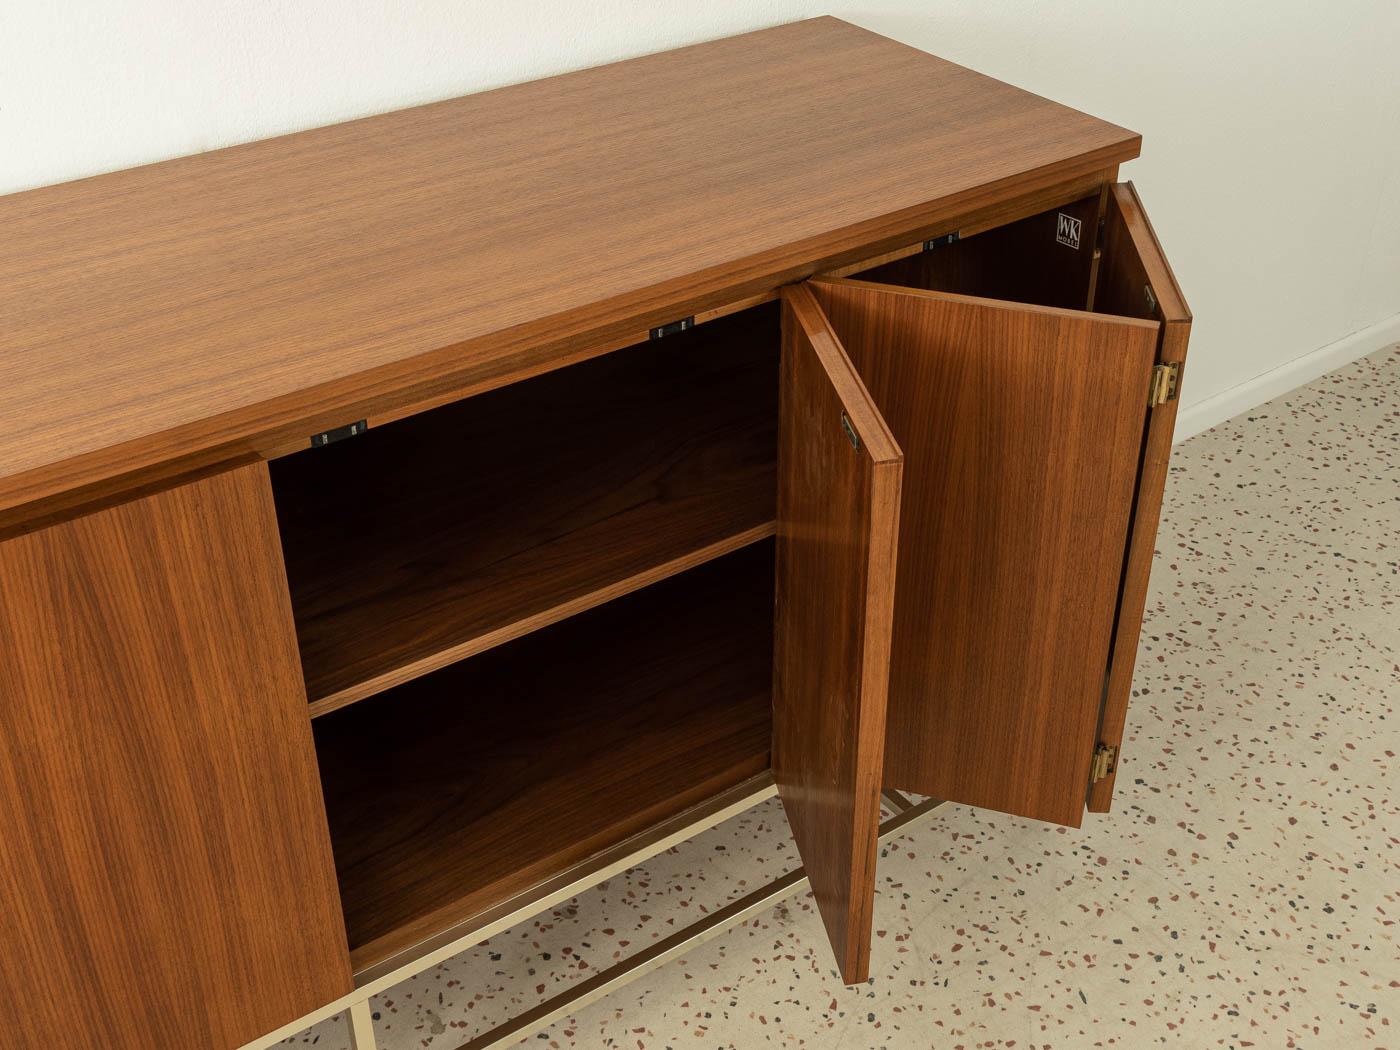 Walnut Paul McCobb Sideboard Manufactured by Wk Möbel, 1950s, Made in Germany